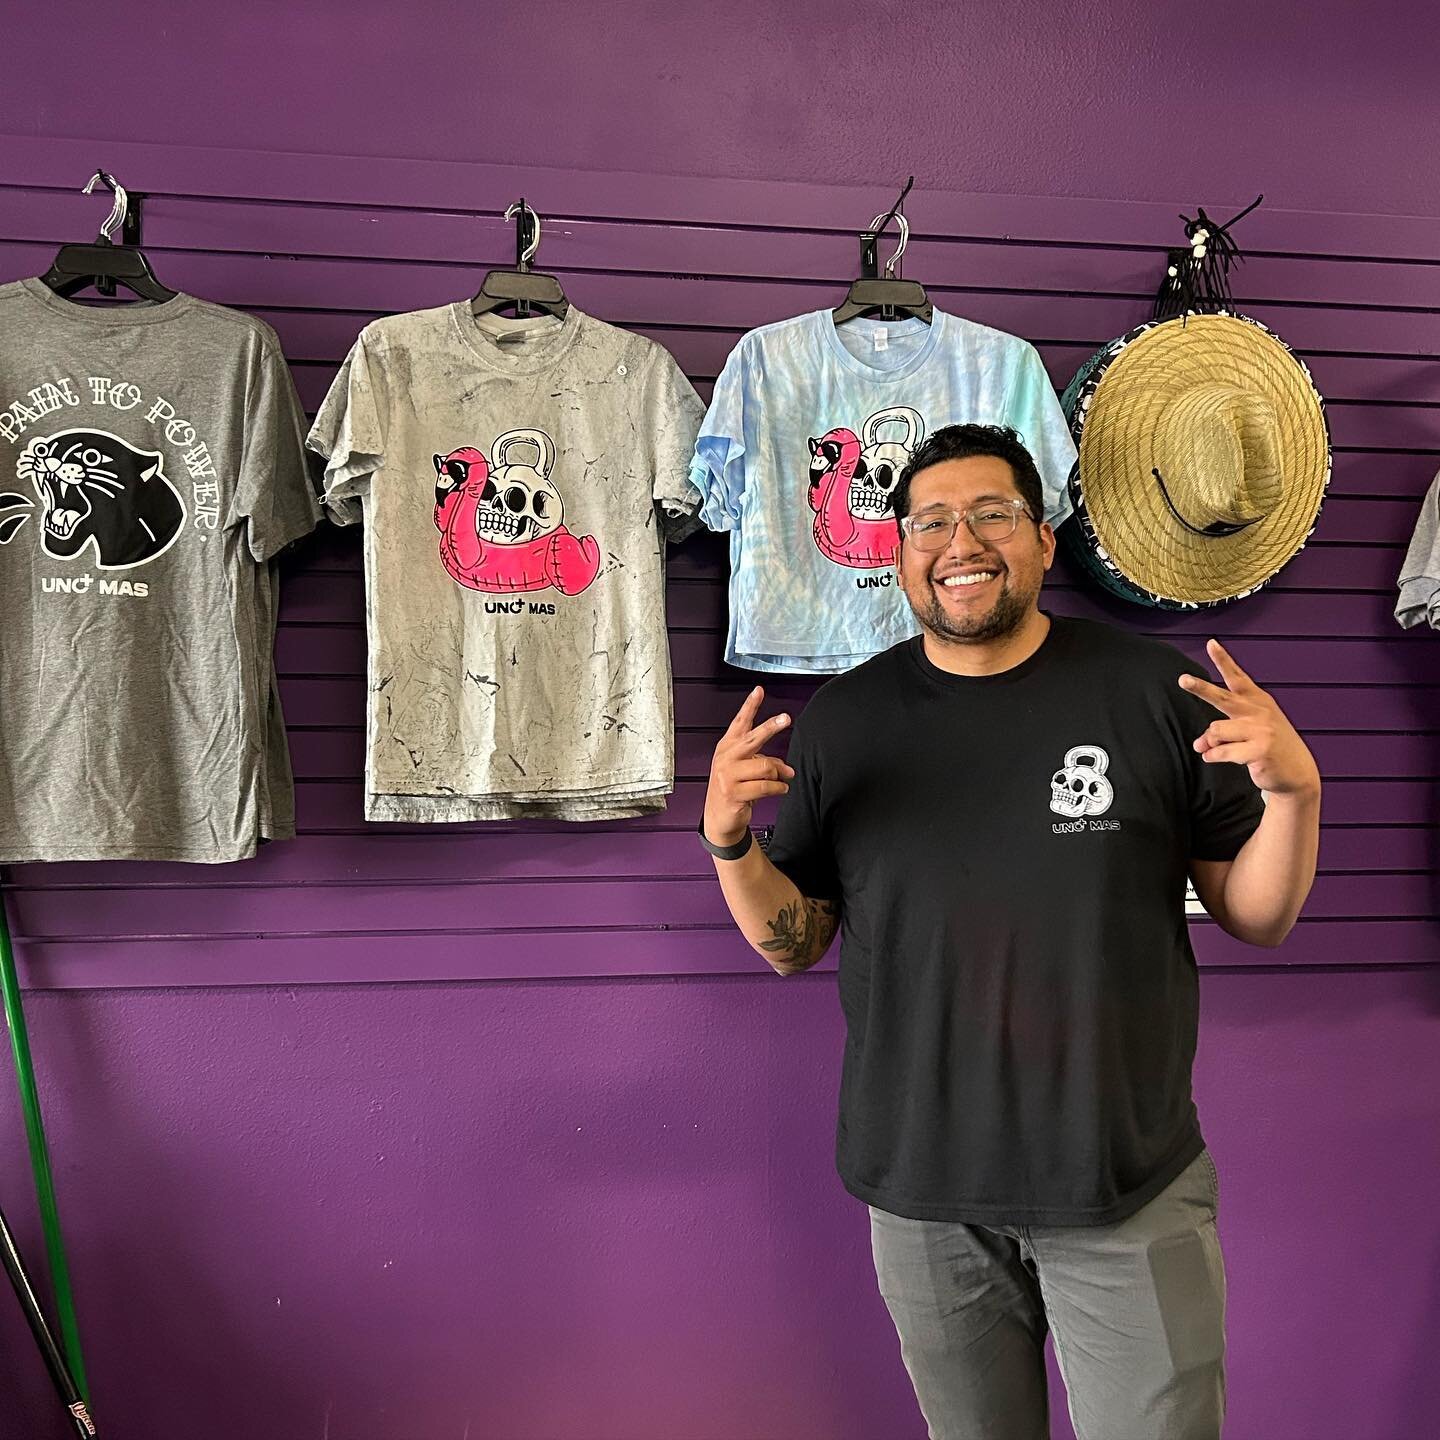 You can now buy @unomasropa gear at One Beat!! We are so excited to partner with them!! Grab your goodies today!! 

#weareonebeat #onebeatcrossfit #onebeat #unomas #unomasropa #community #crossfit #aurora #fitfam